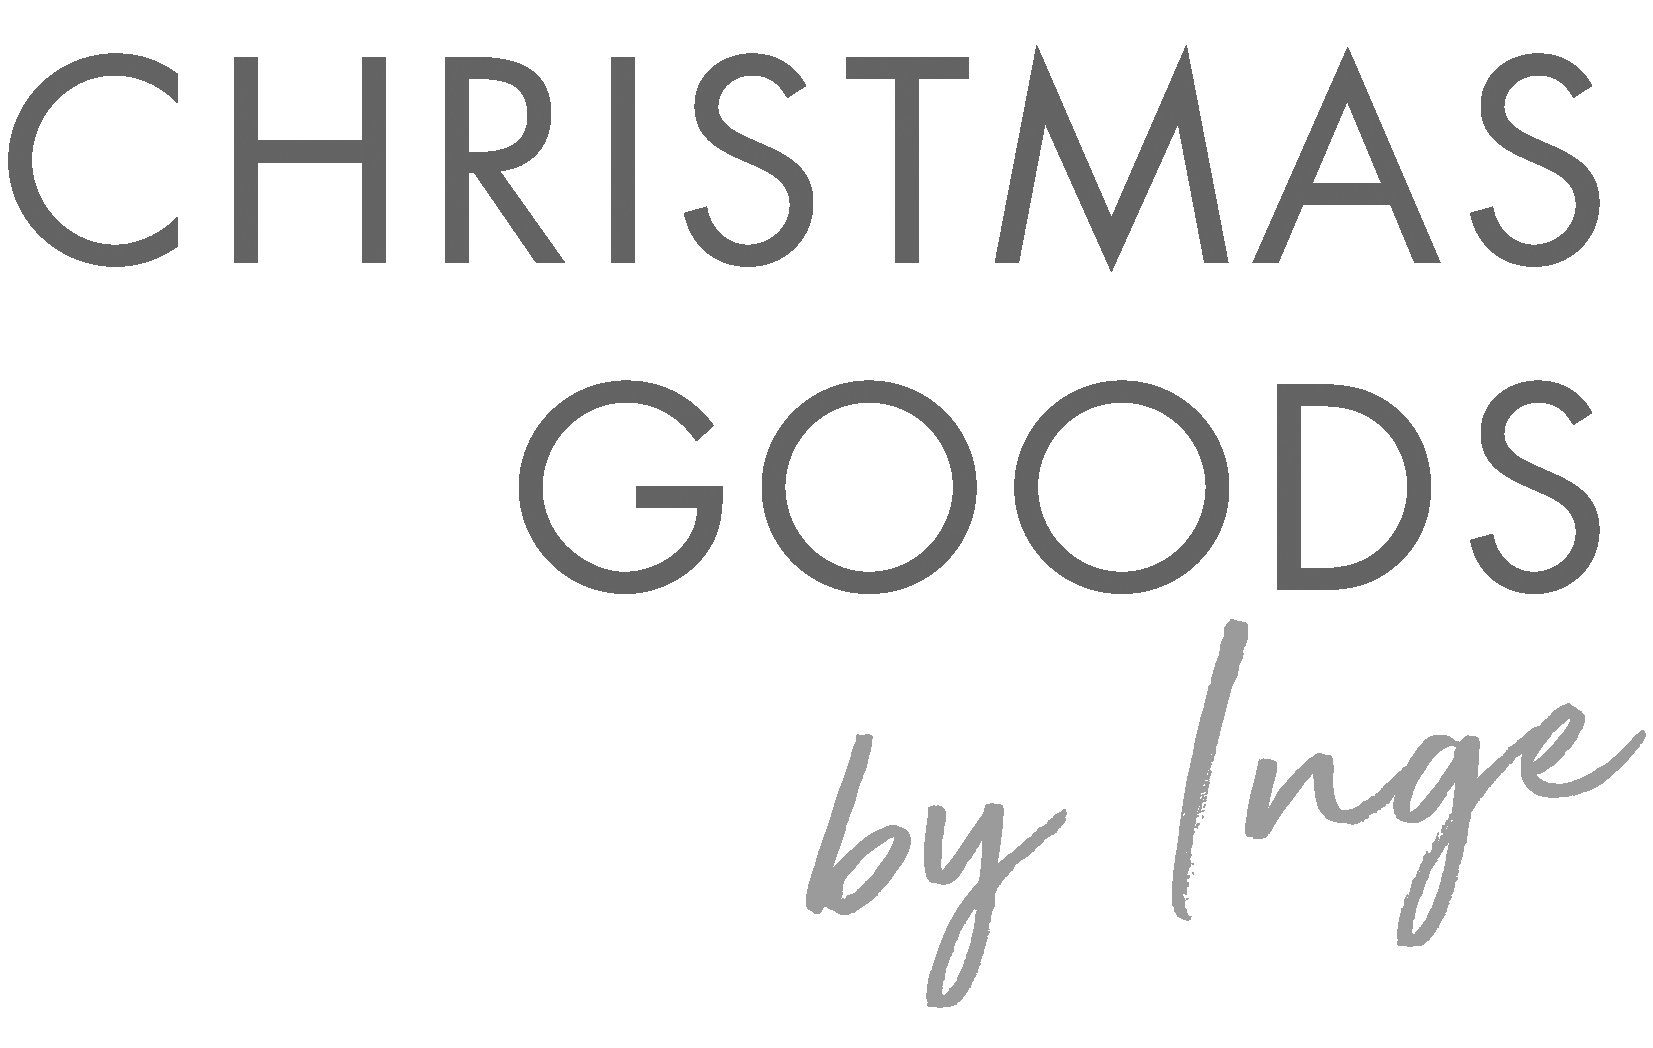 CHRISTMAS GOODS by Inge